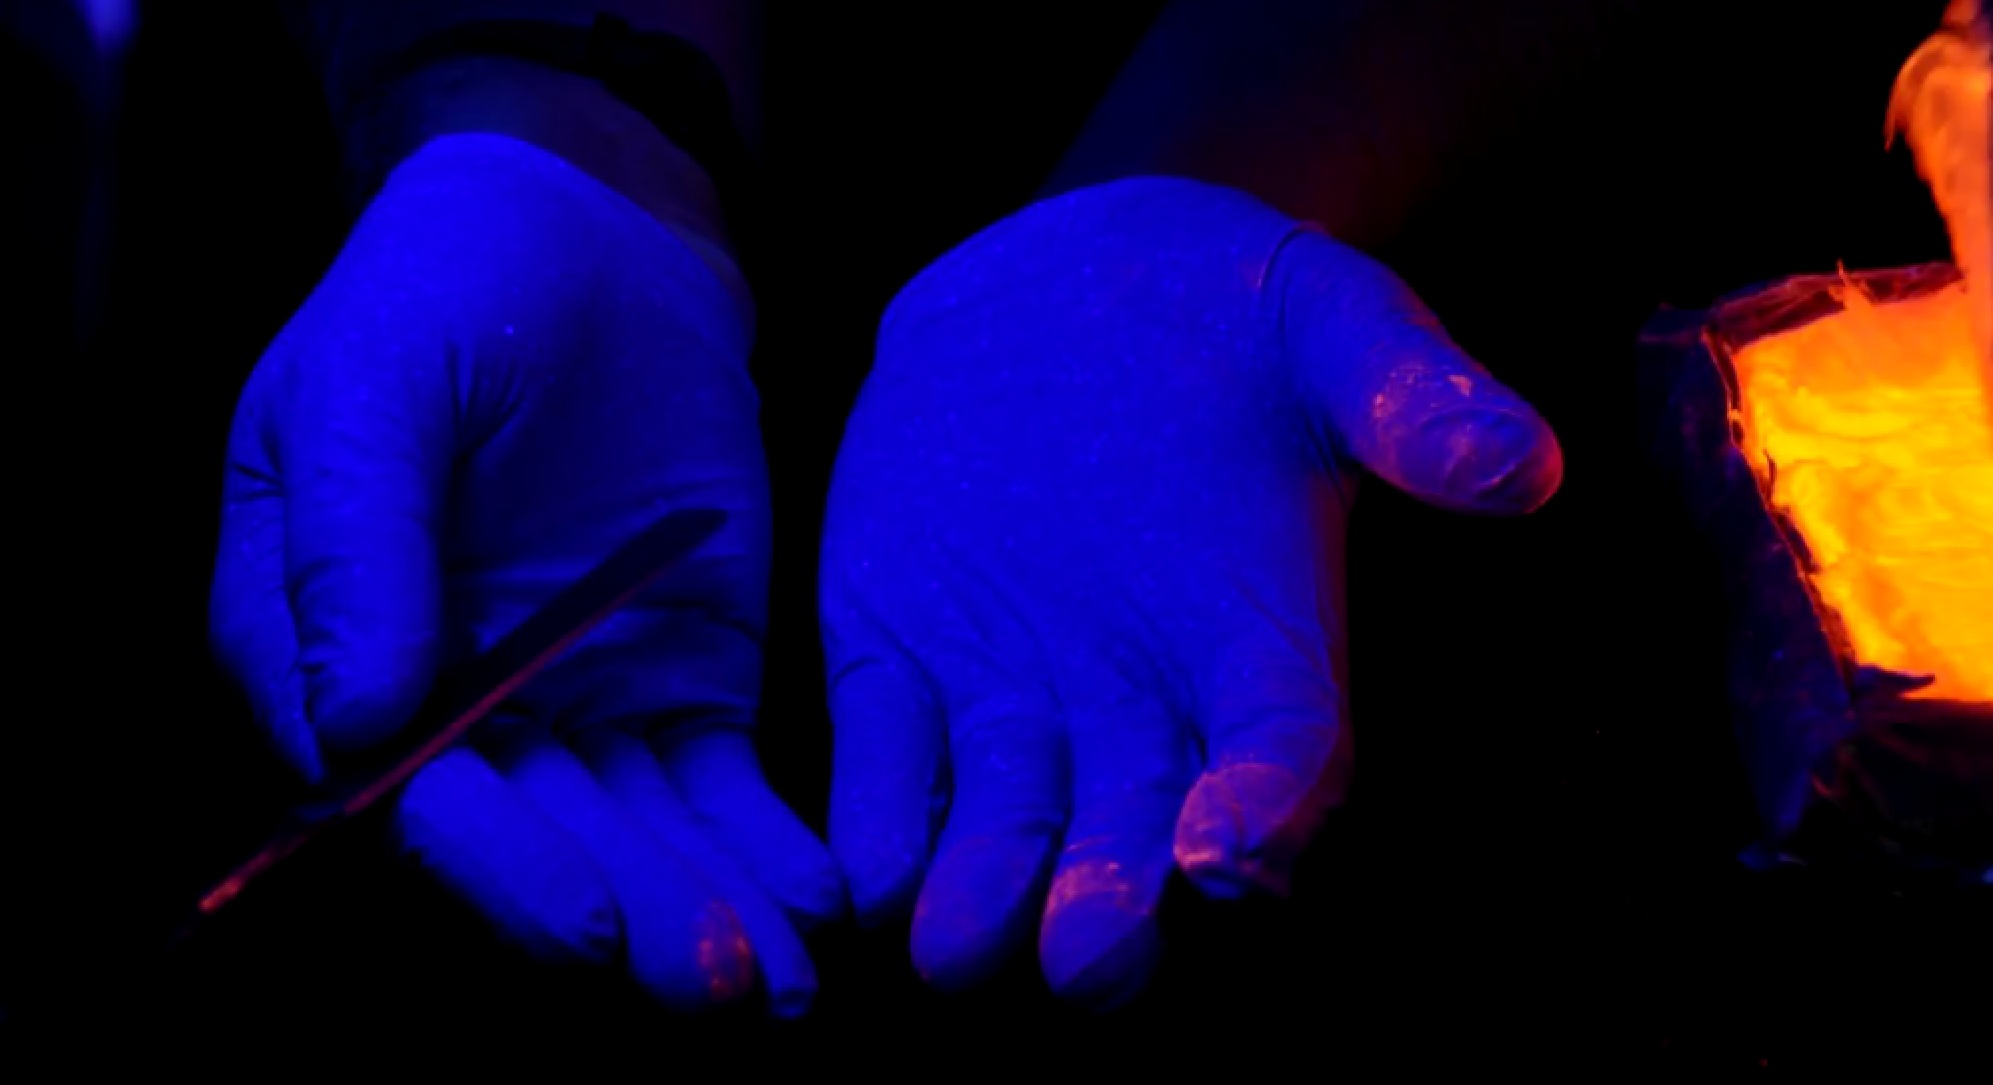 How UV Technology Is Becoming an Everyday Tool